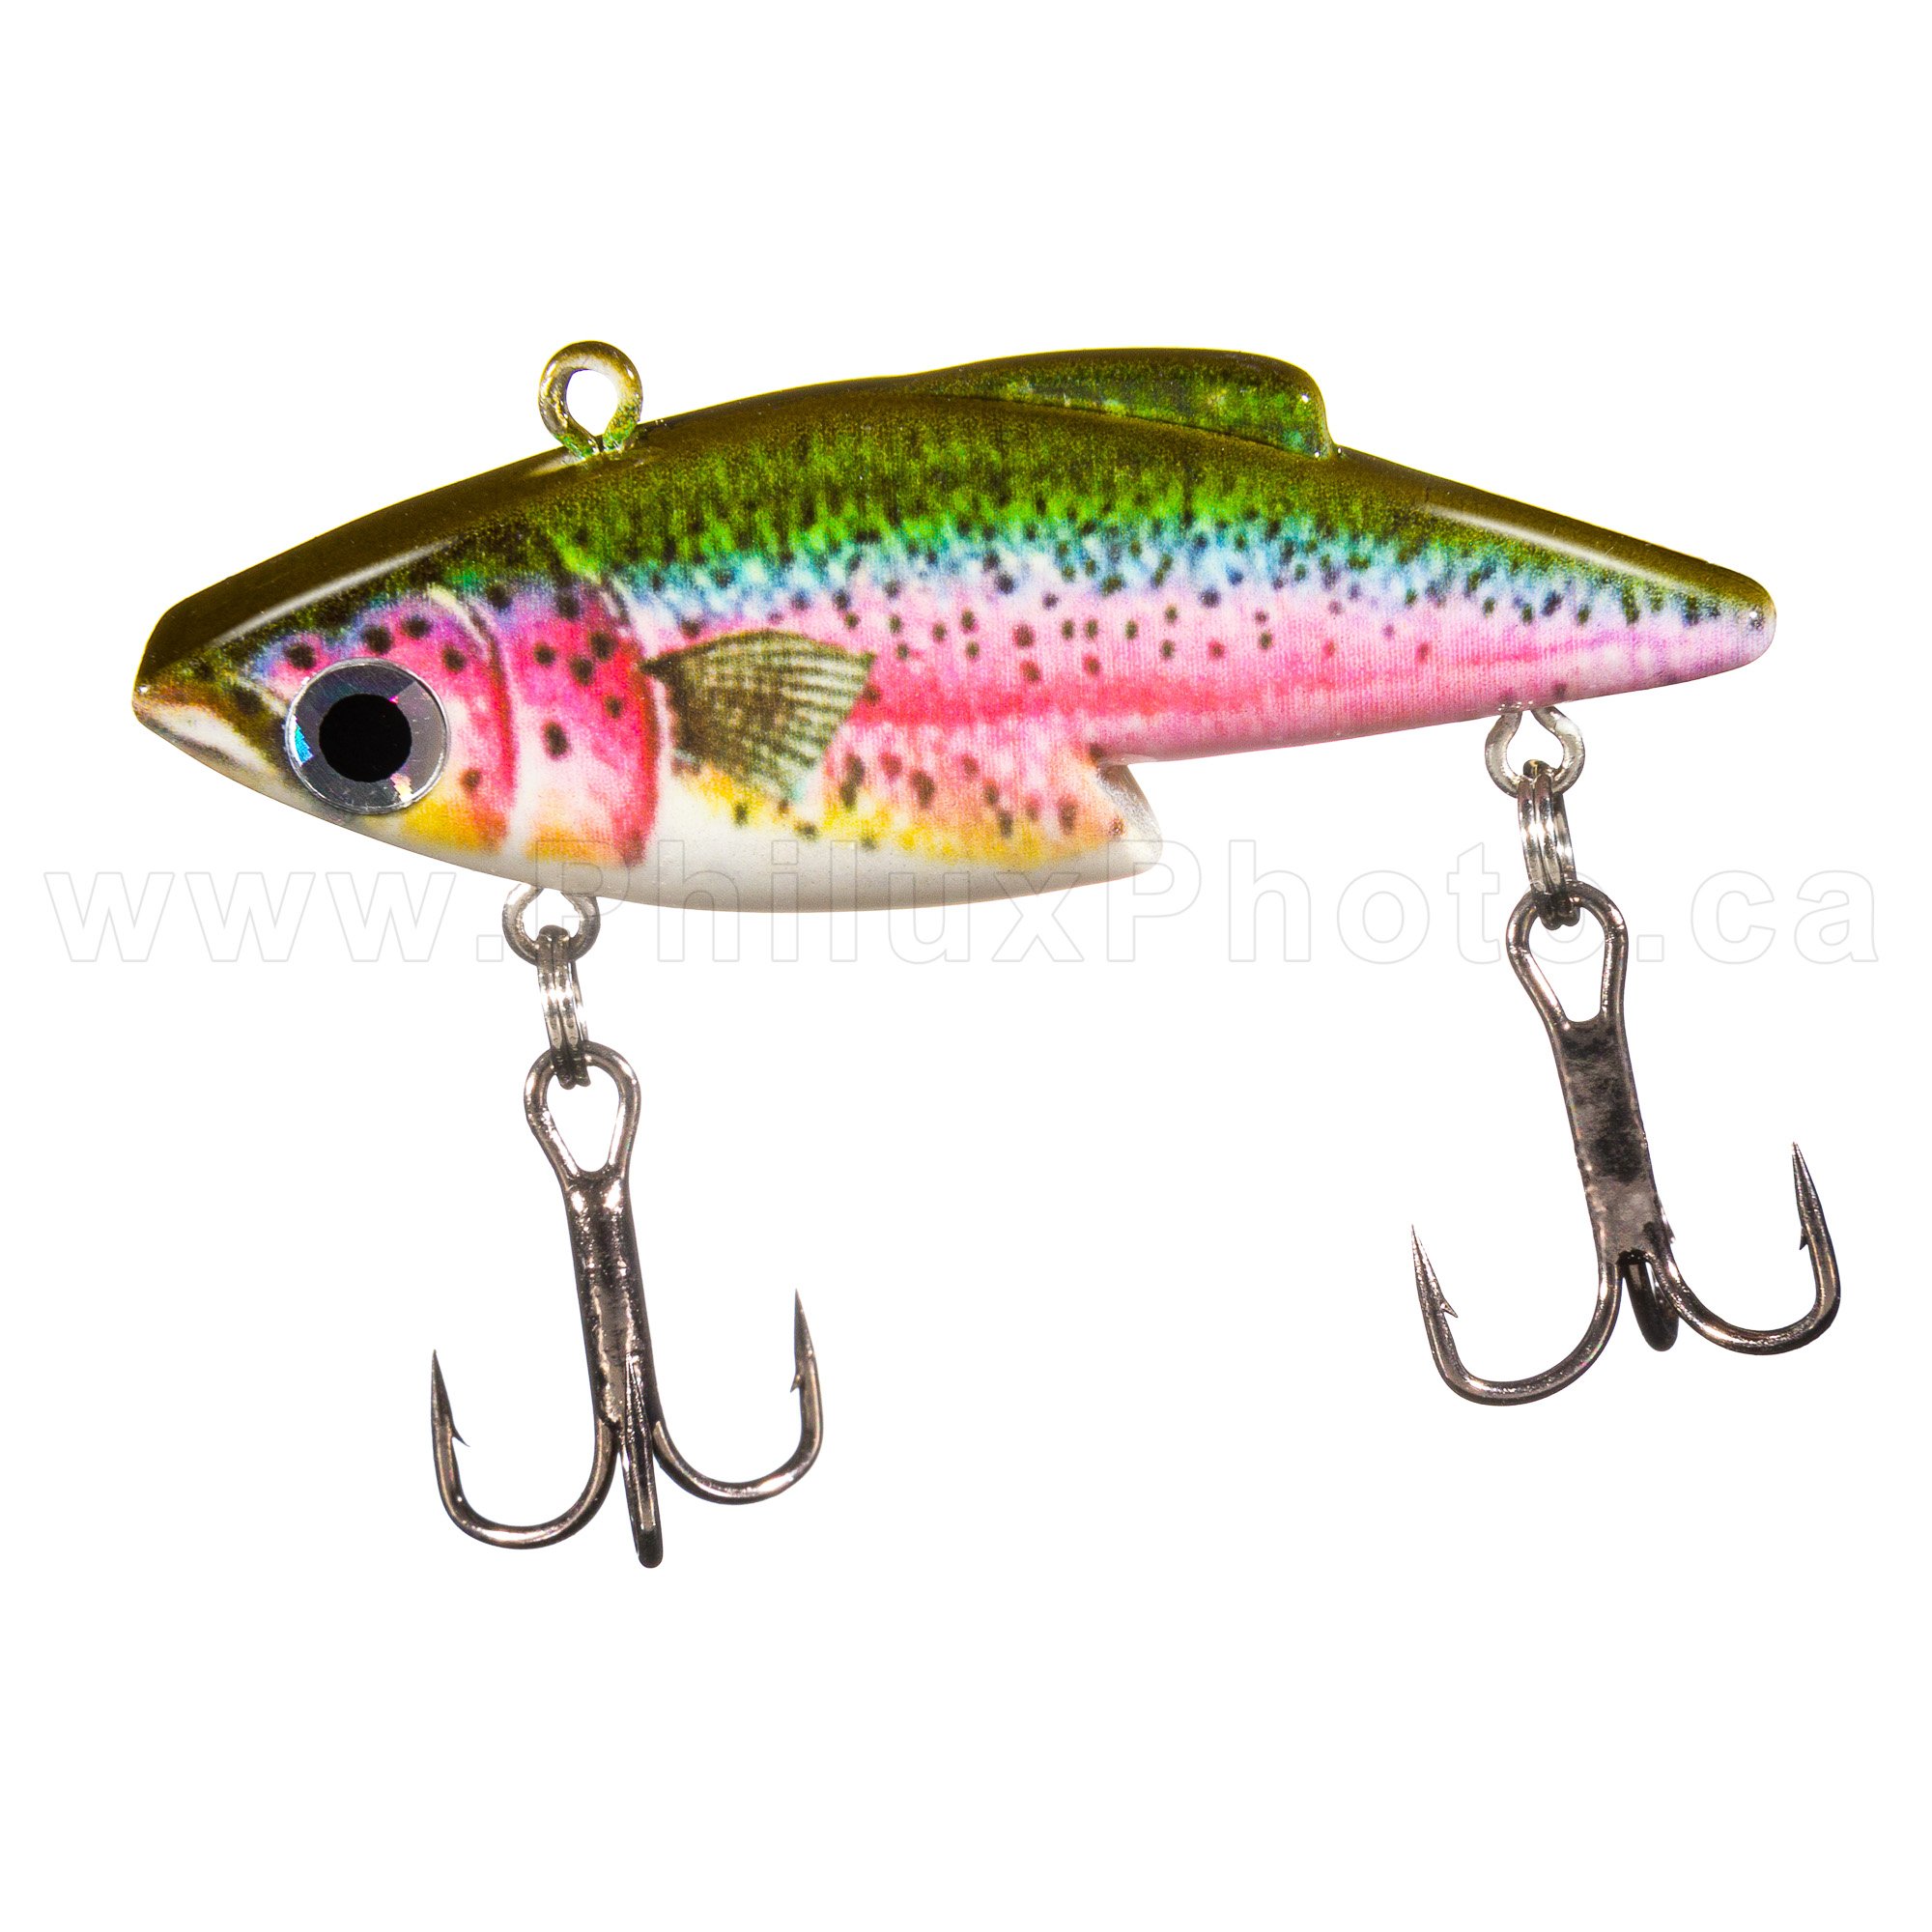 Dan Routh Photography: Fishing Lures